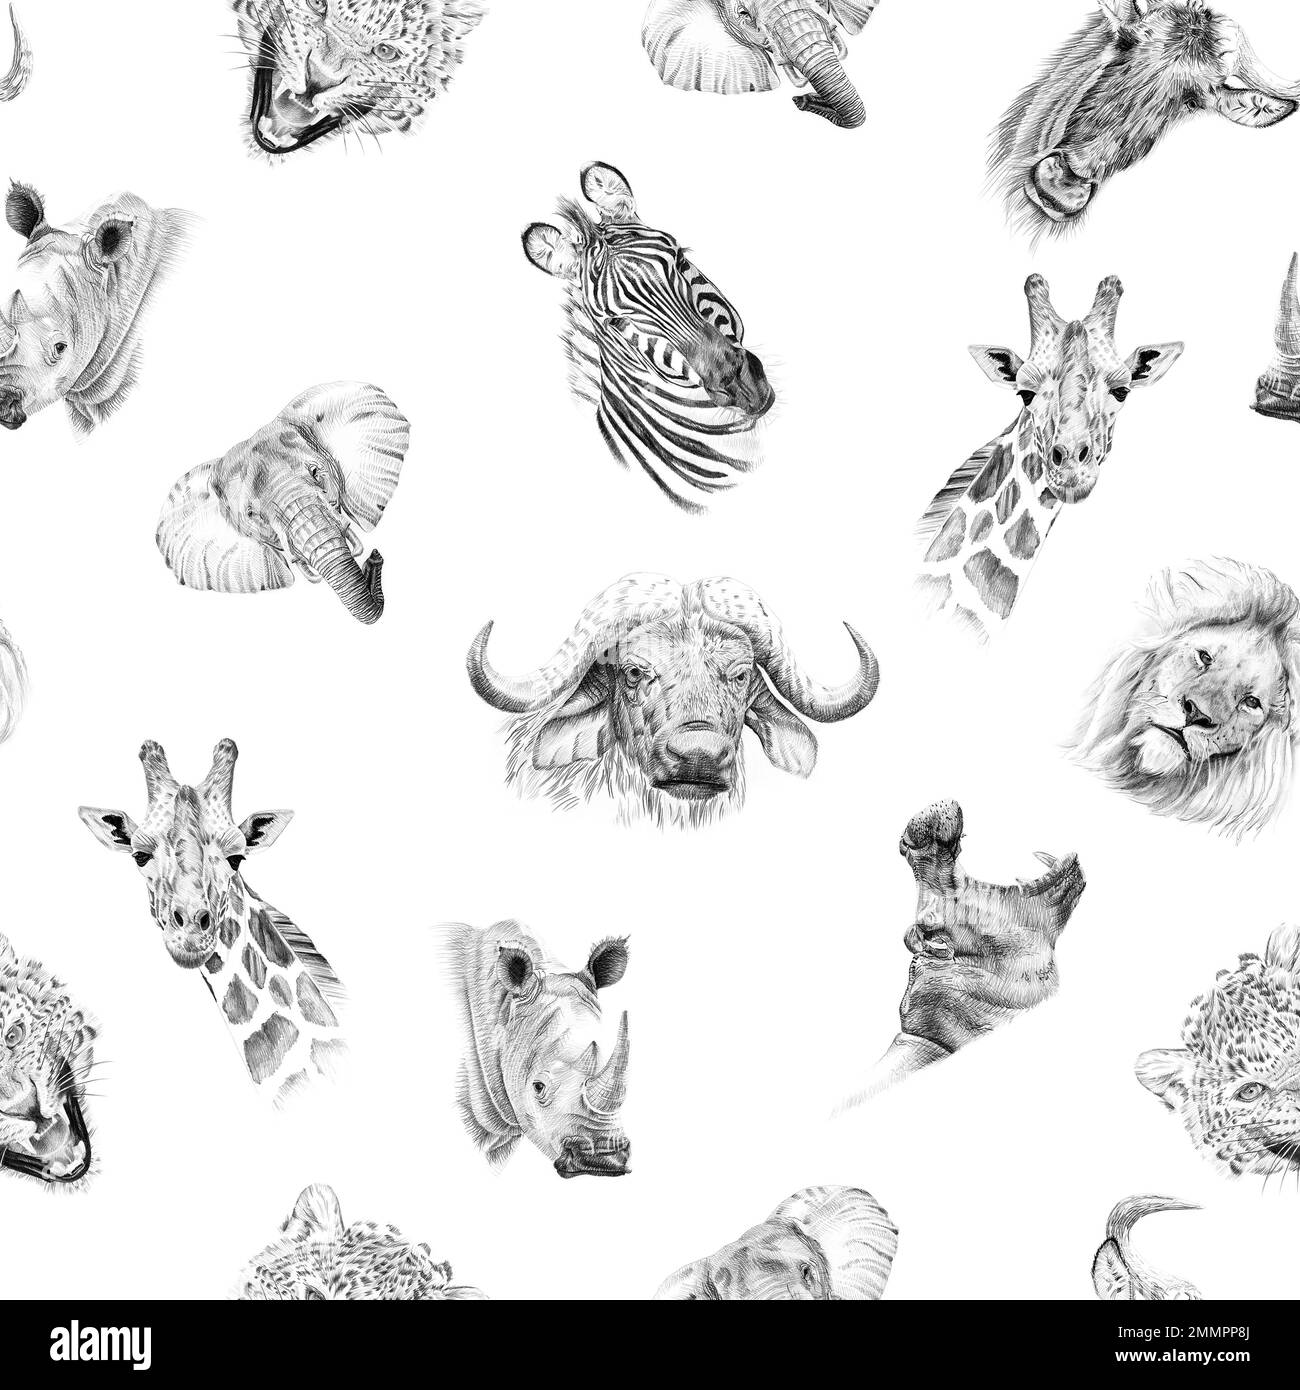 Seamless pattern of hand drawn sketch african animal portraits. Illustration isolated on white background Stock Photo